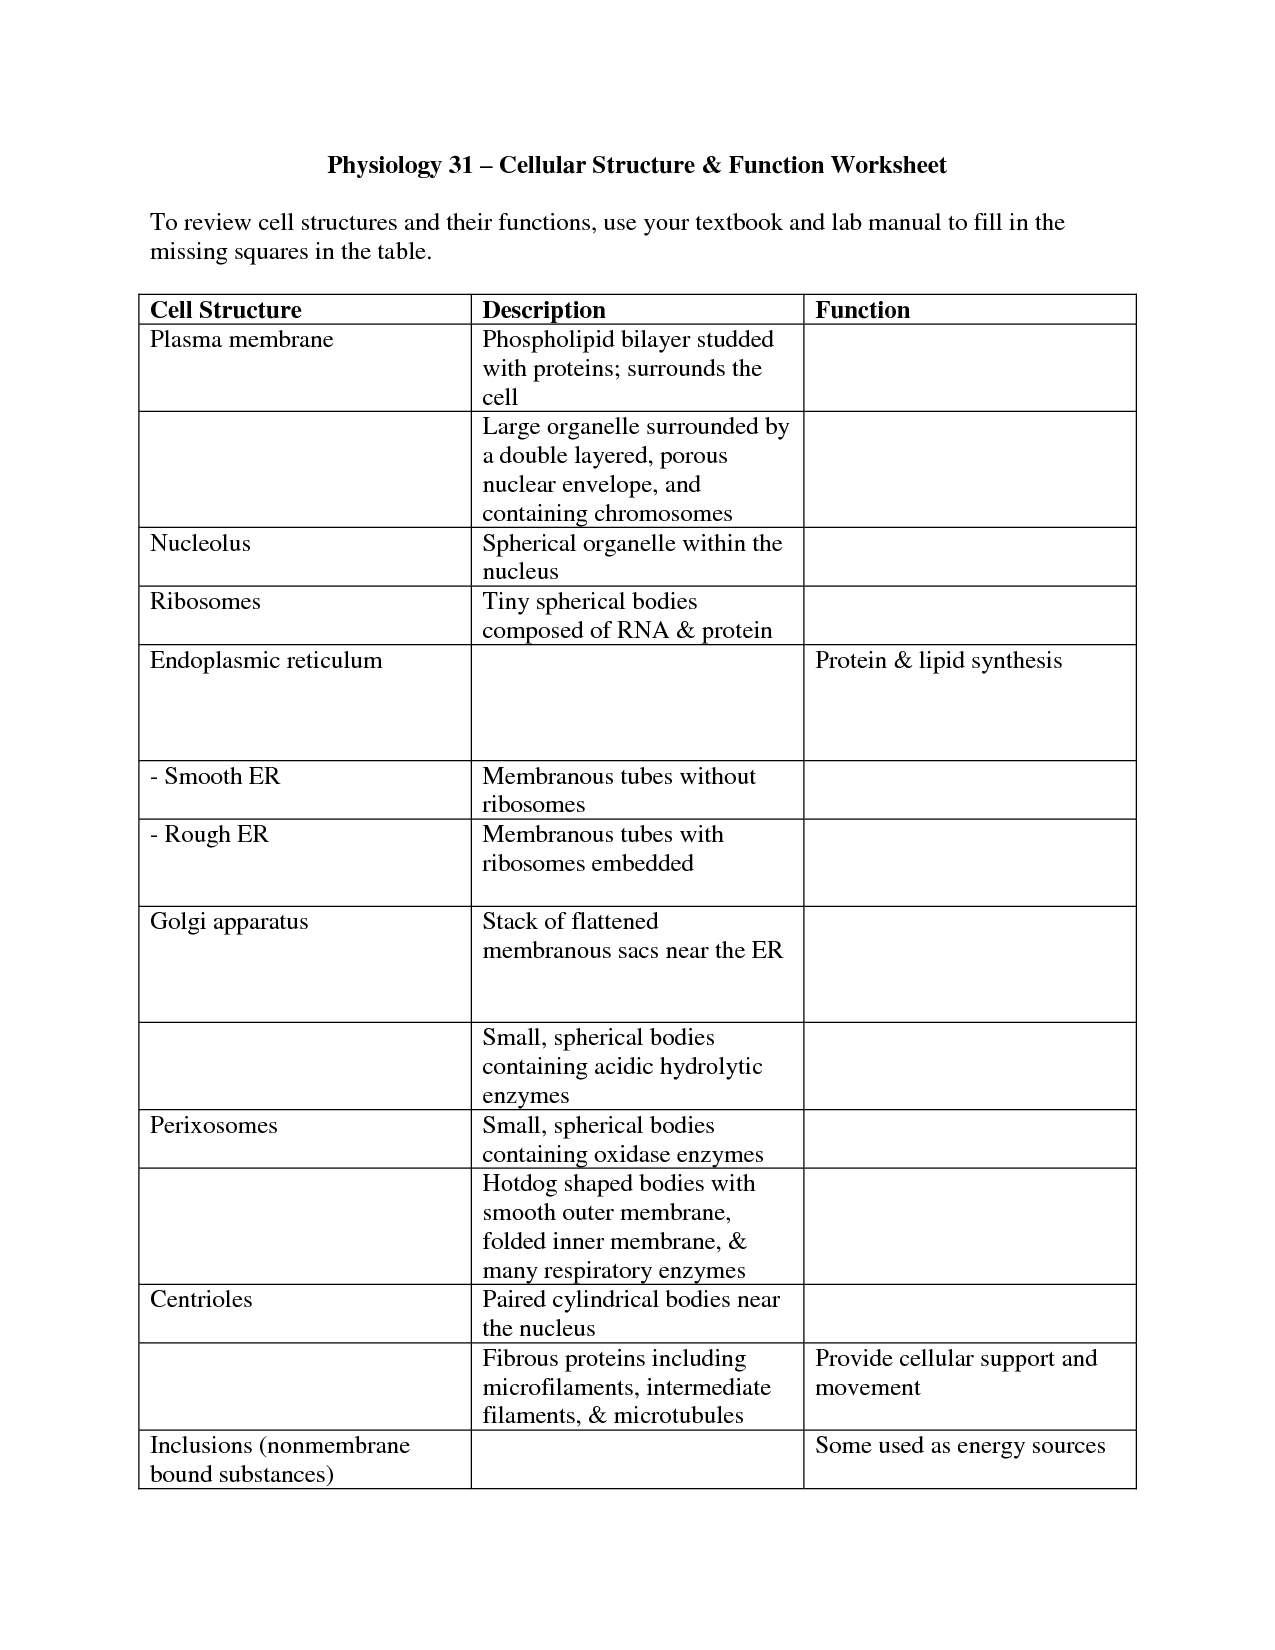 Cell Structure and Function Worksheet Answers Image